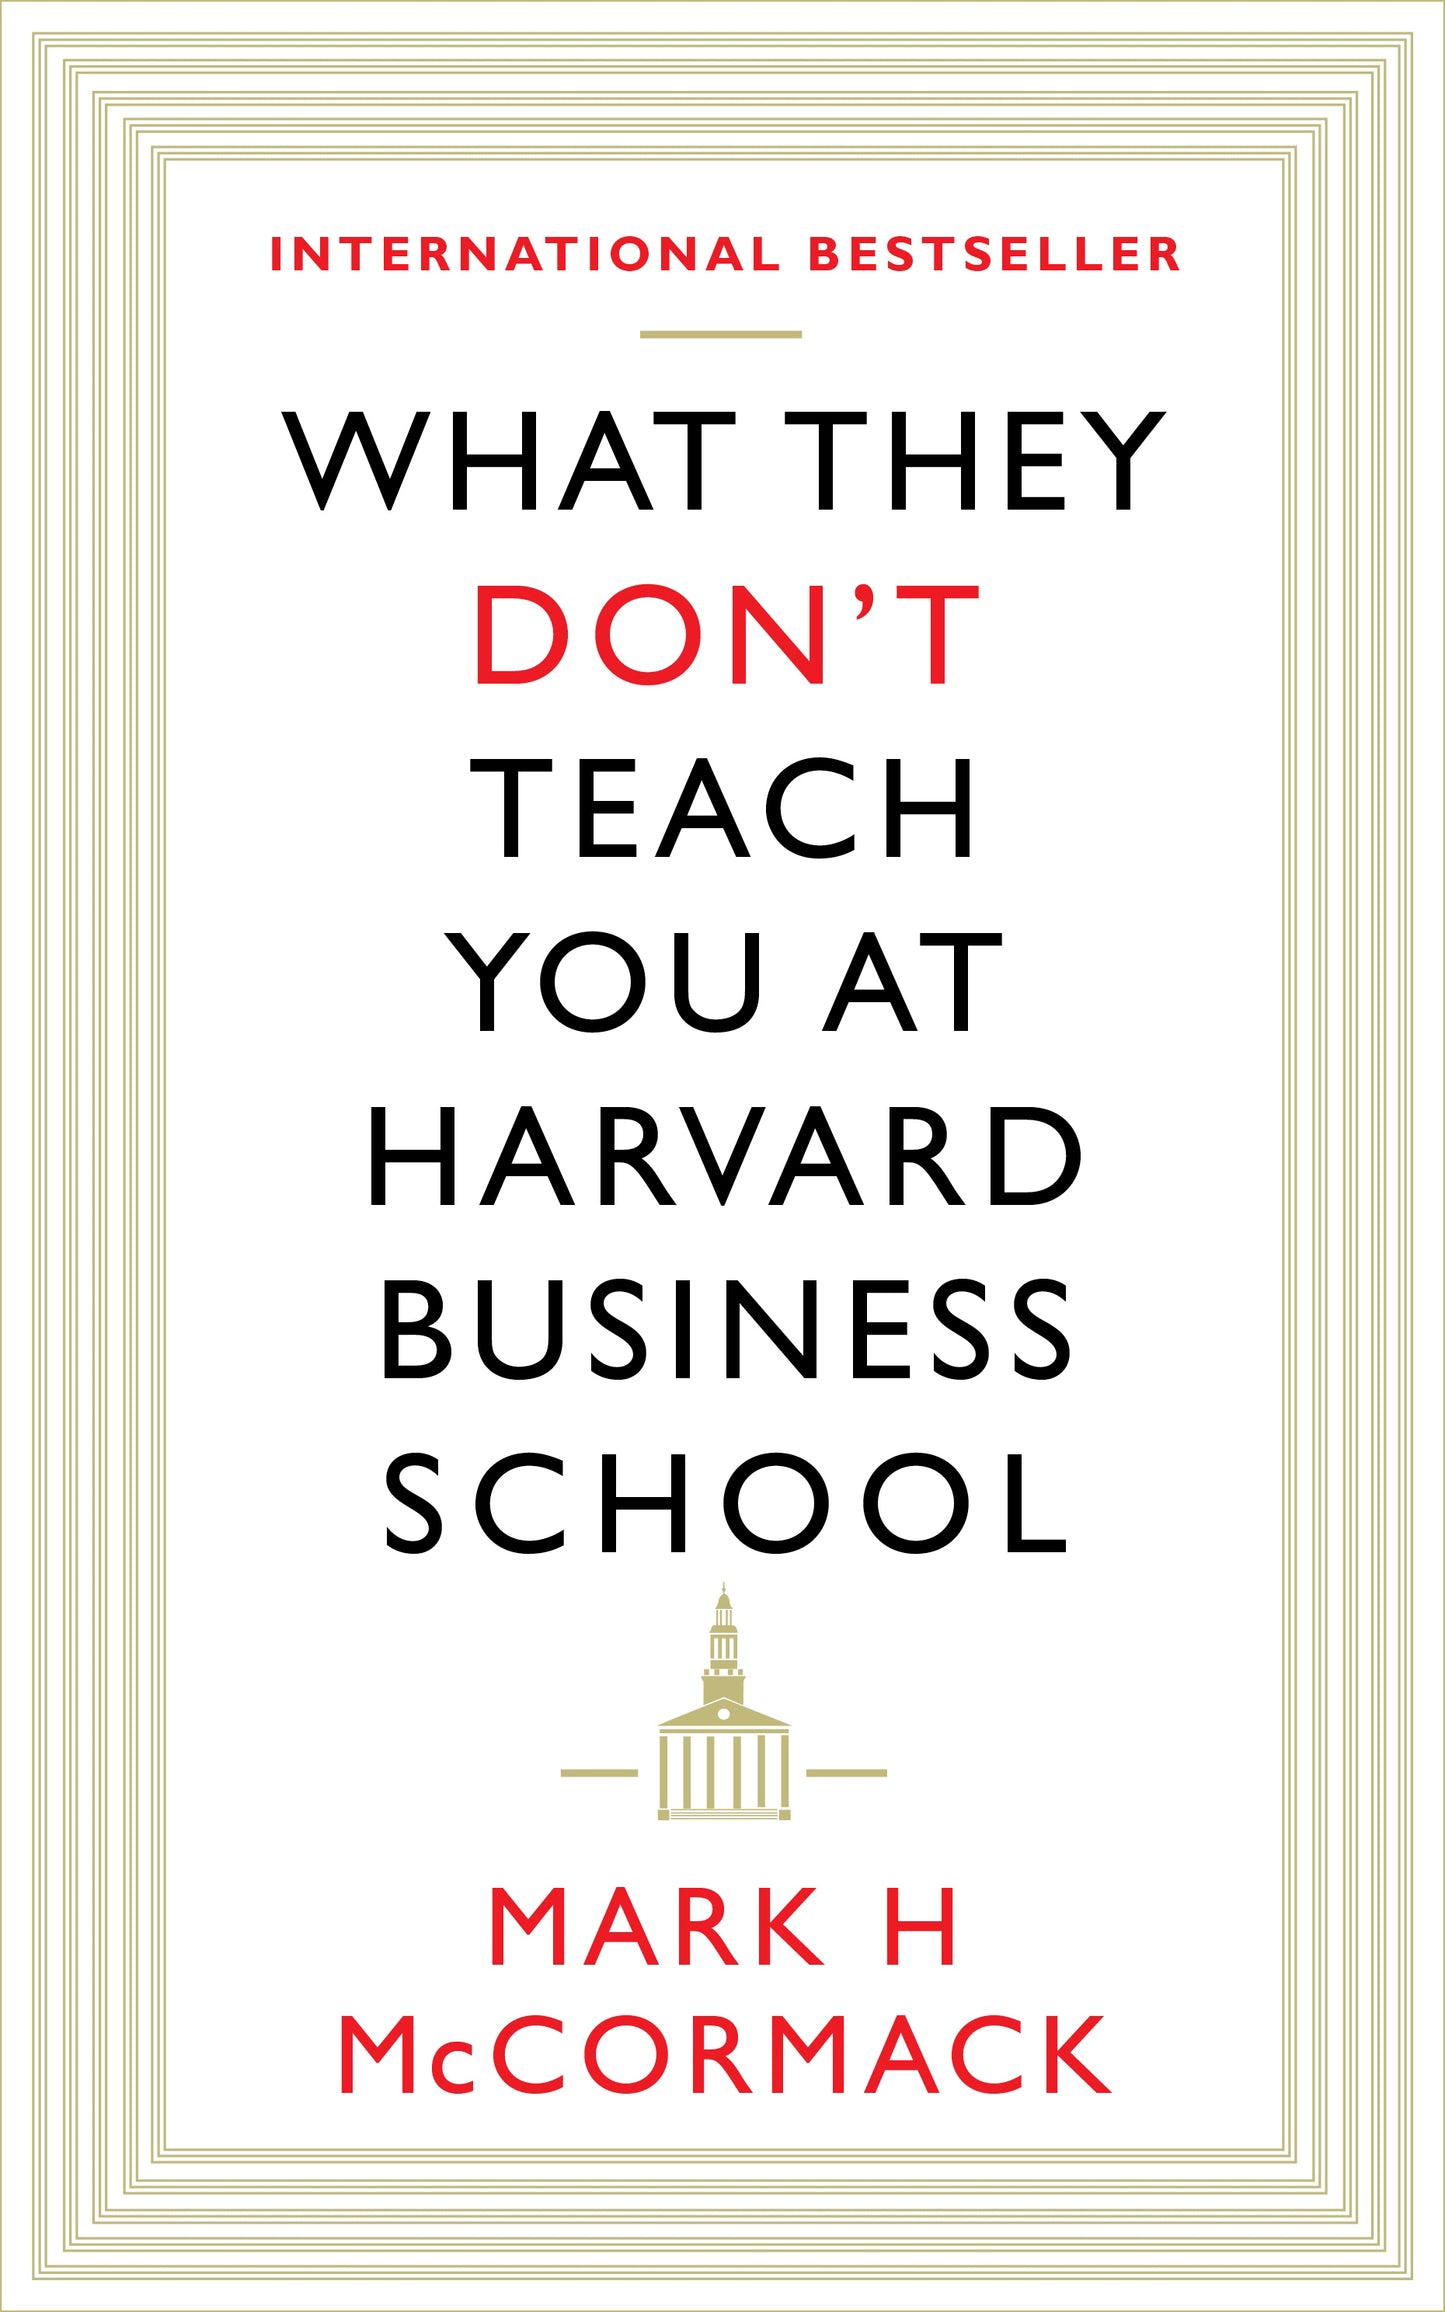 What They Don't Teach You At Harvard Business School. By Mark H. McCormack